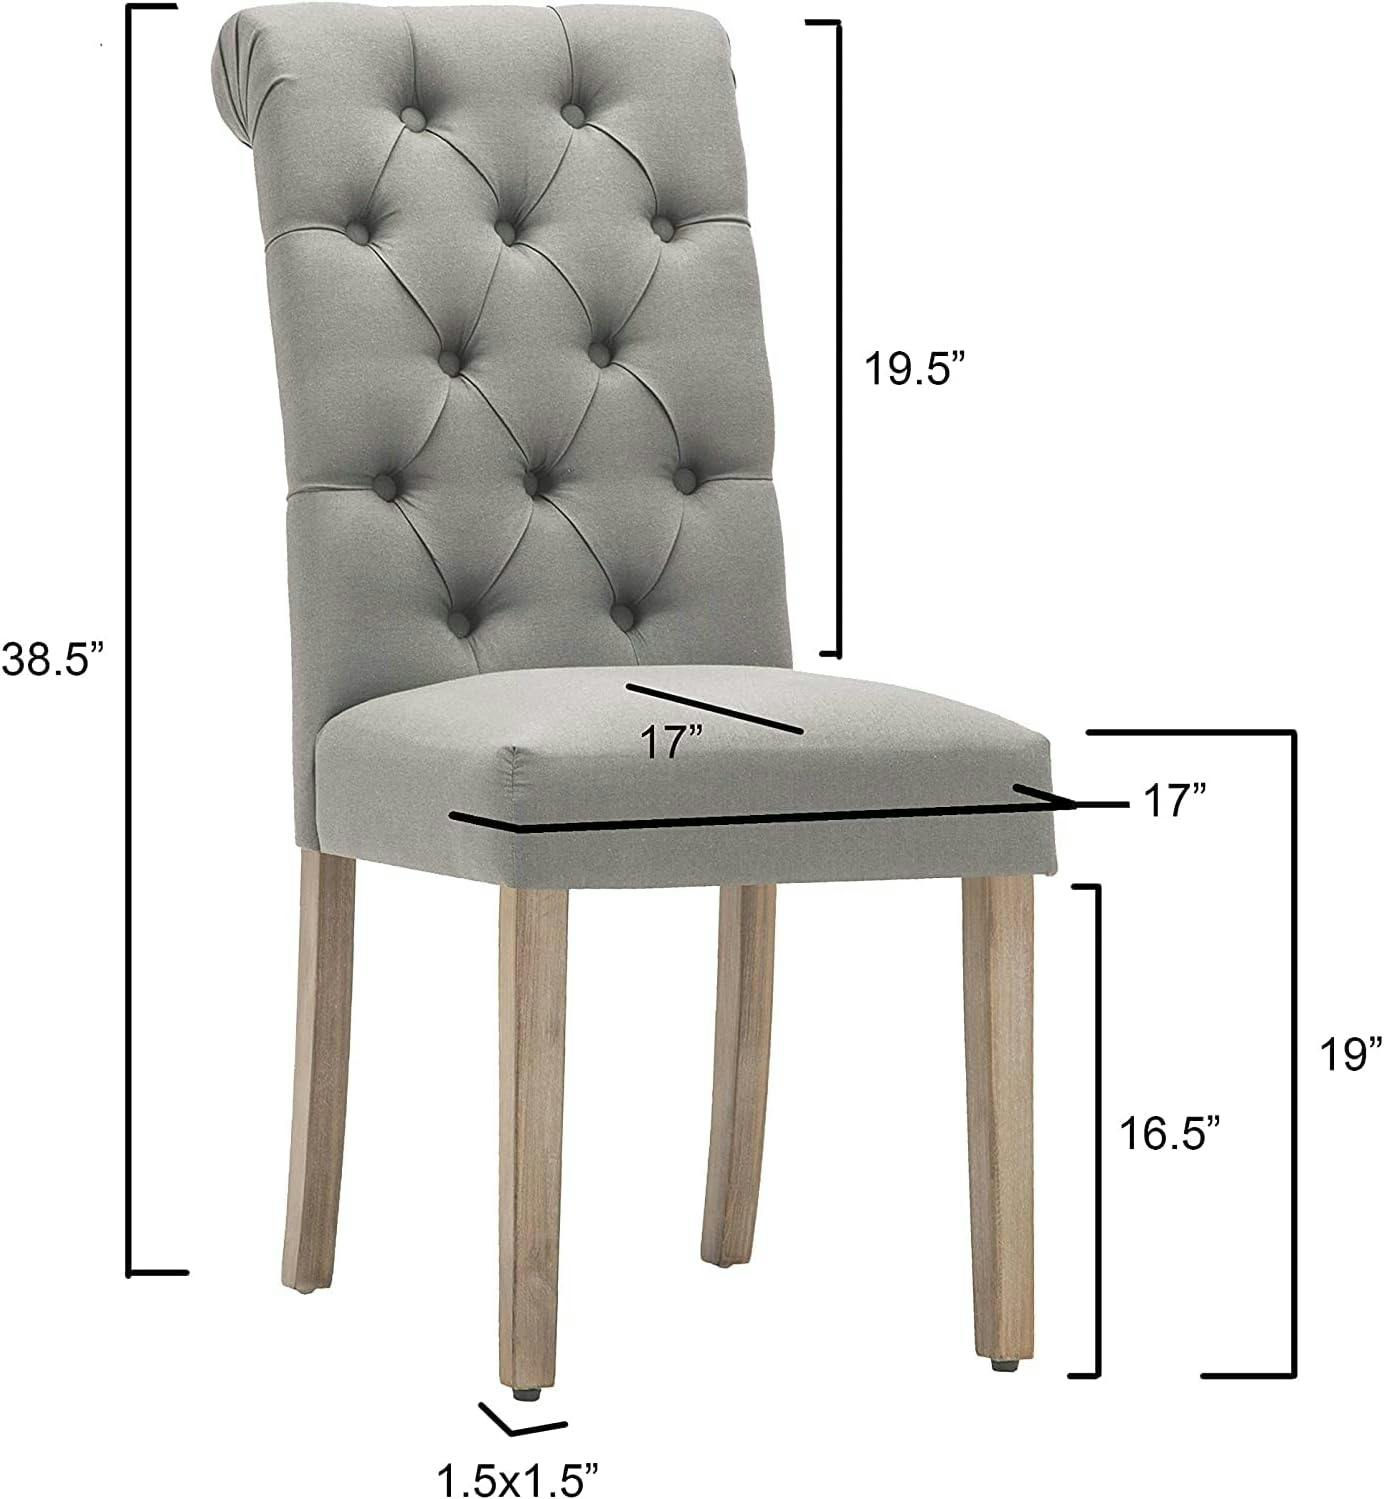 Sophisticated Grey Linen and Weathered Wood Tufted Dining Chair (Set of 2)